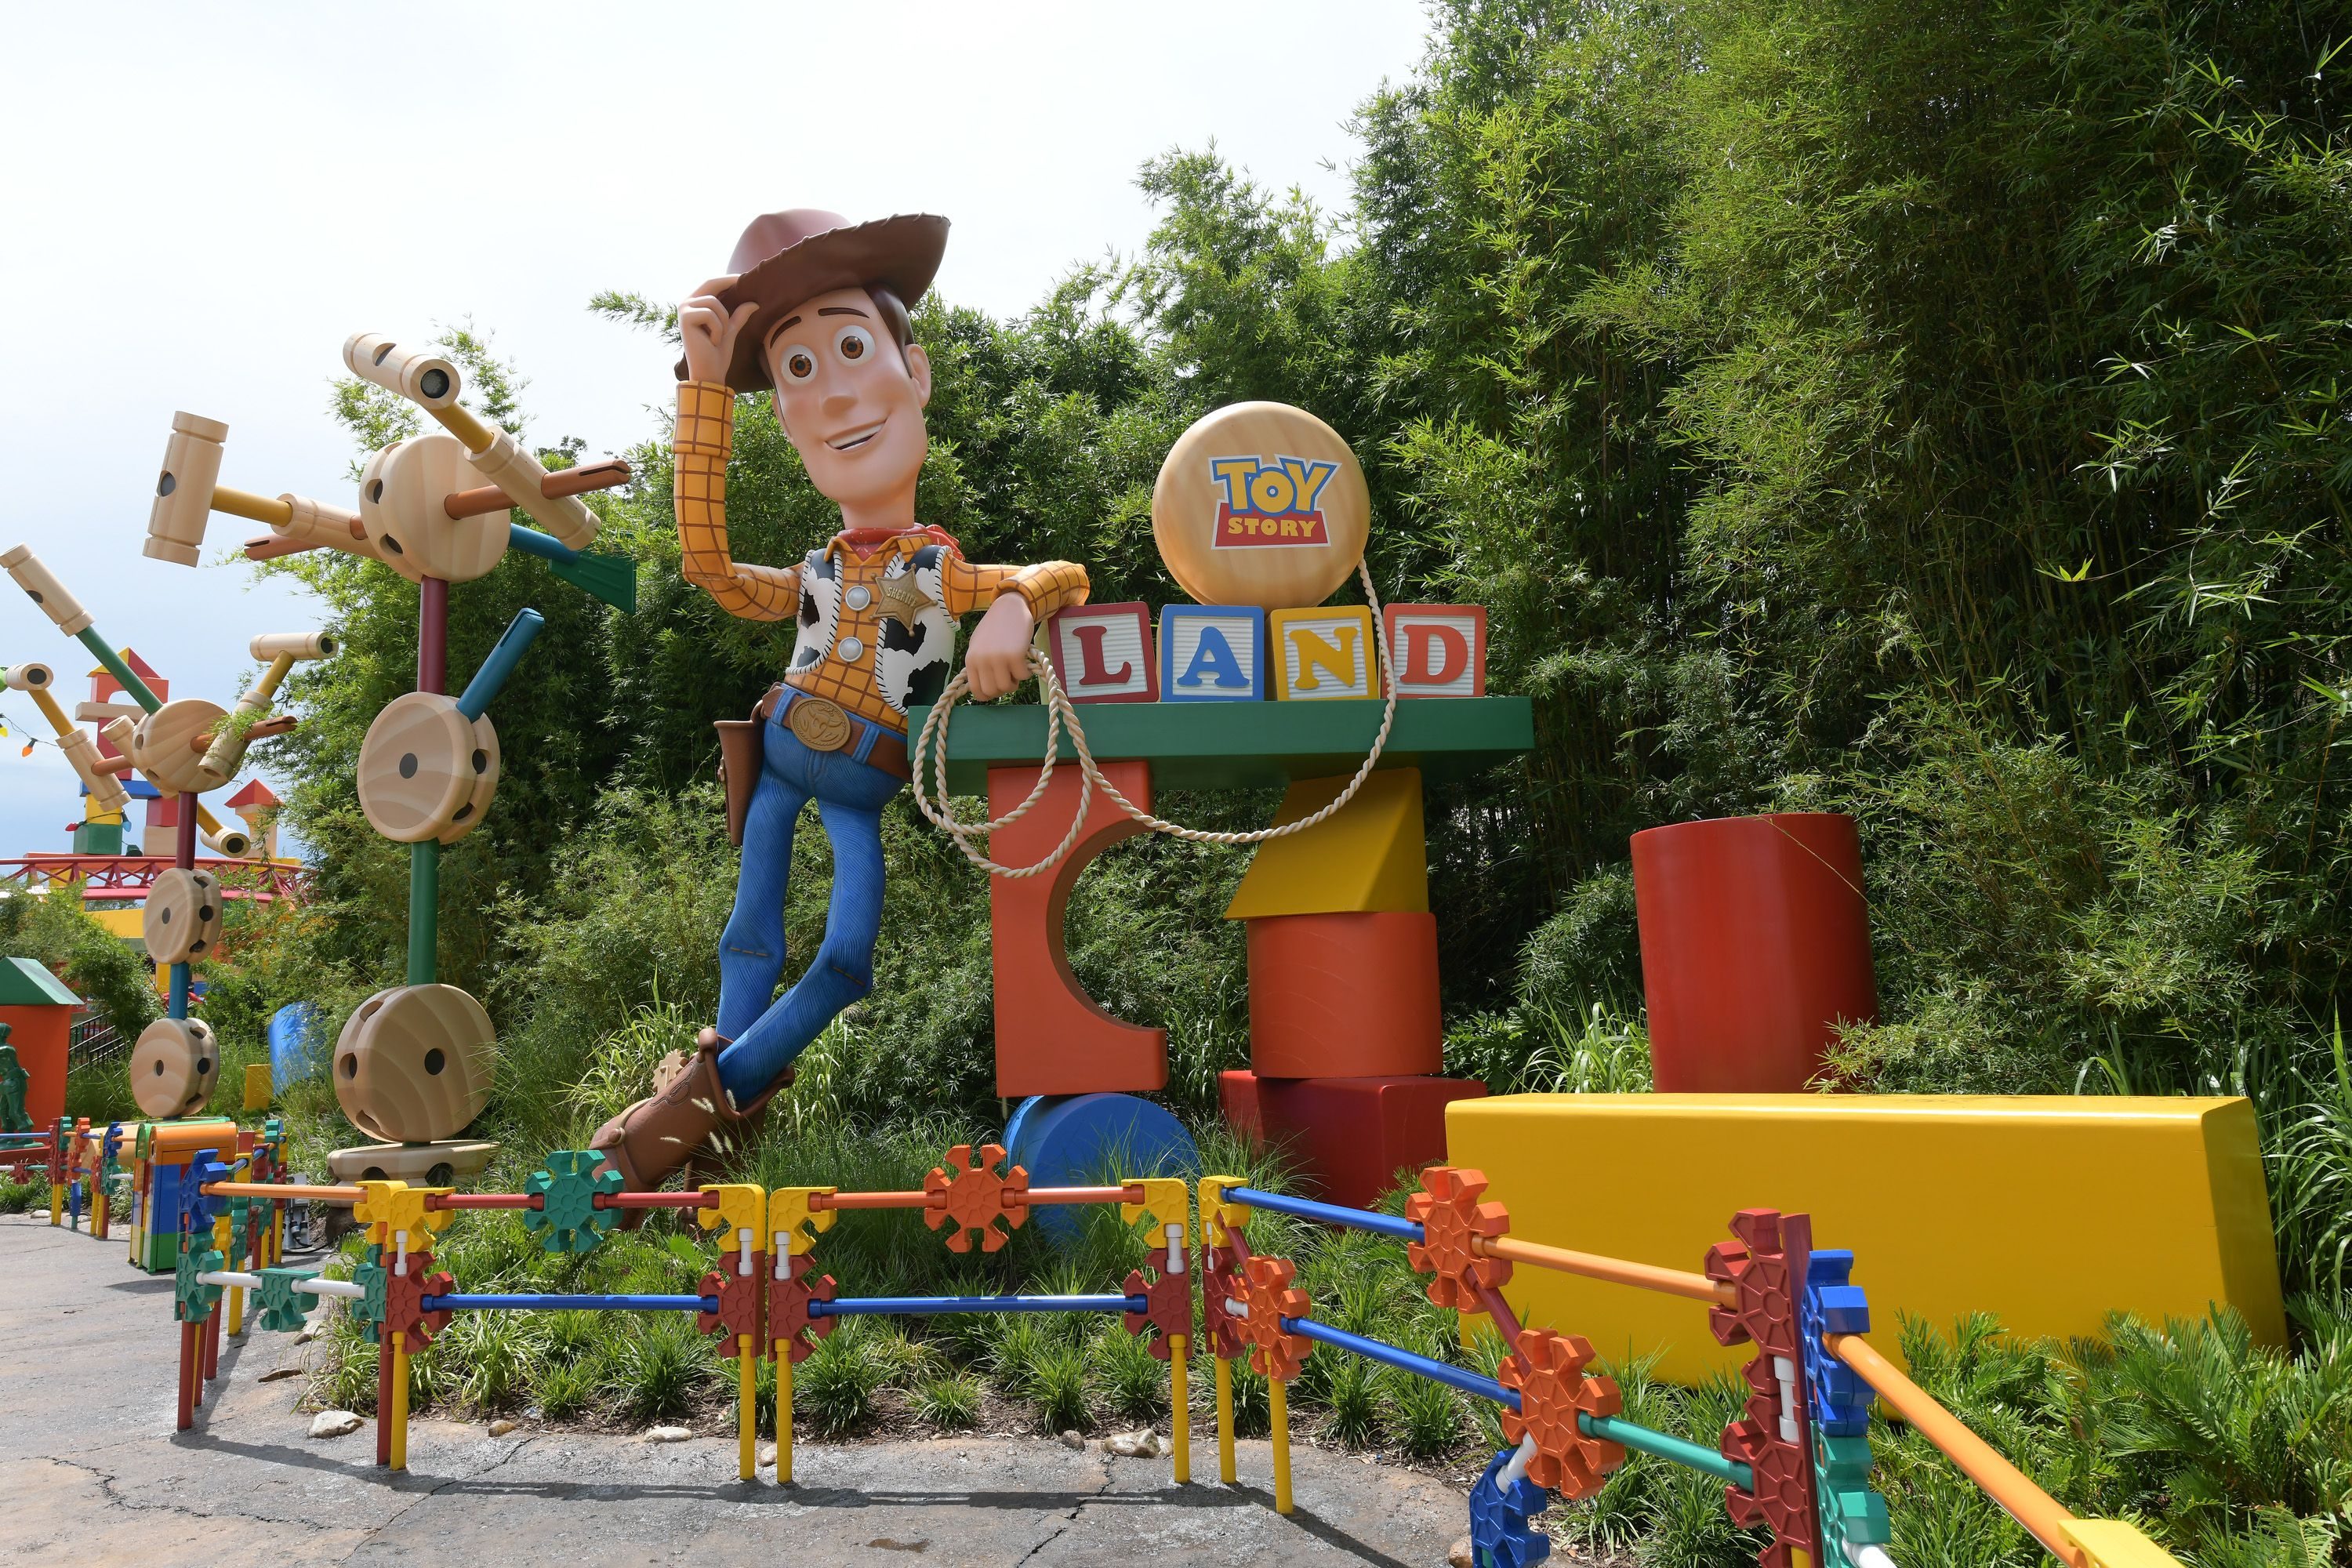 Mandatory Credit: Photo by Gustavo Caballero/South Beach Photo/Shutterstock (9730461l) Toy Story Land Opening Preview at Walt Disney World - General Views Toy Story Land Opening Preview, Orlando, USA - 28 Jun 2018